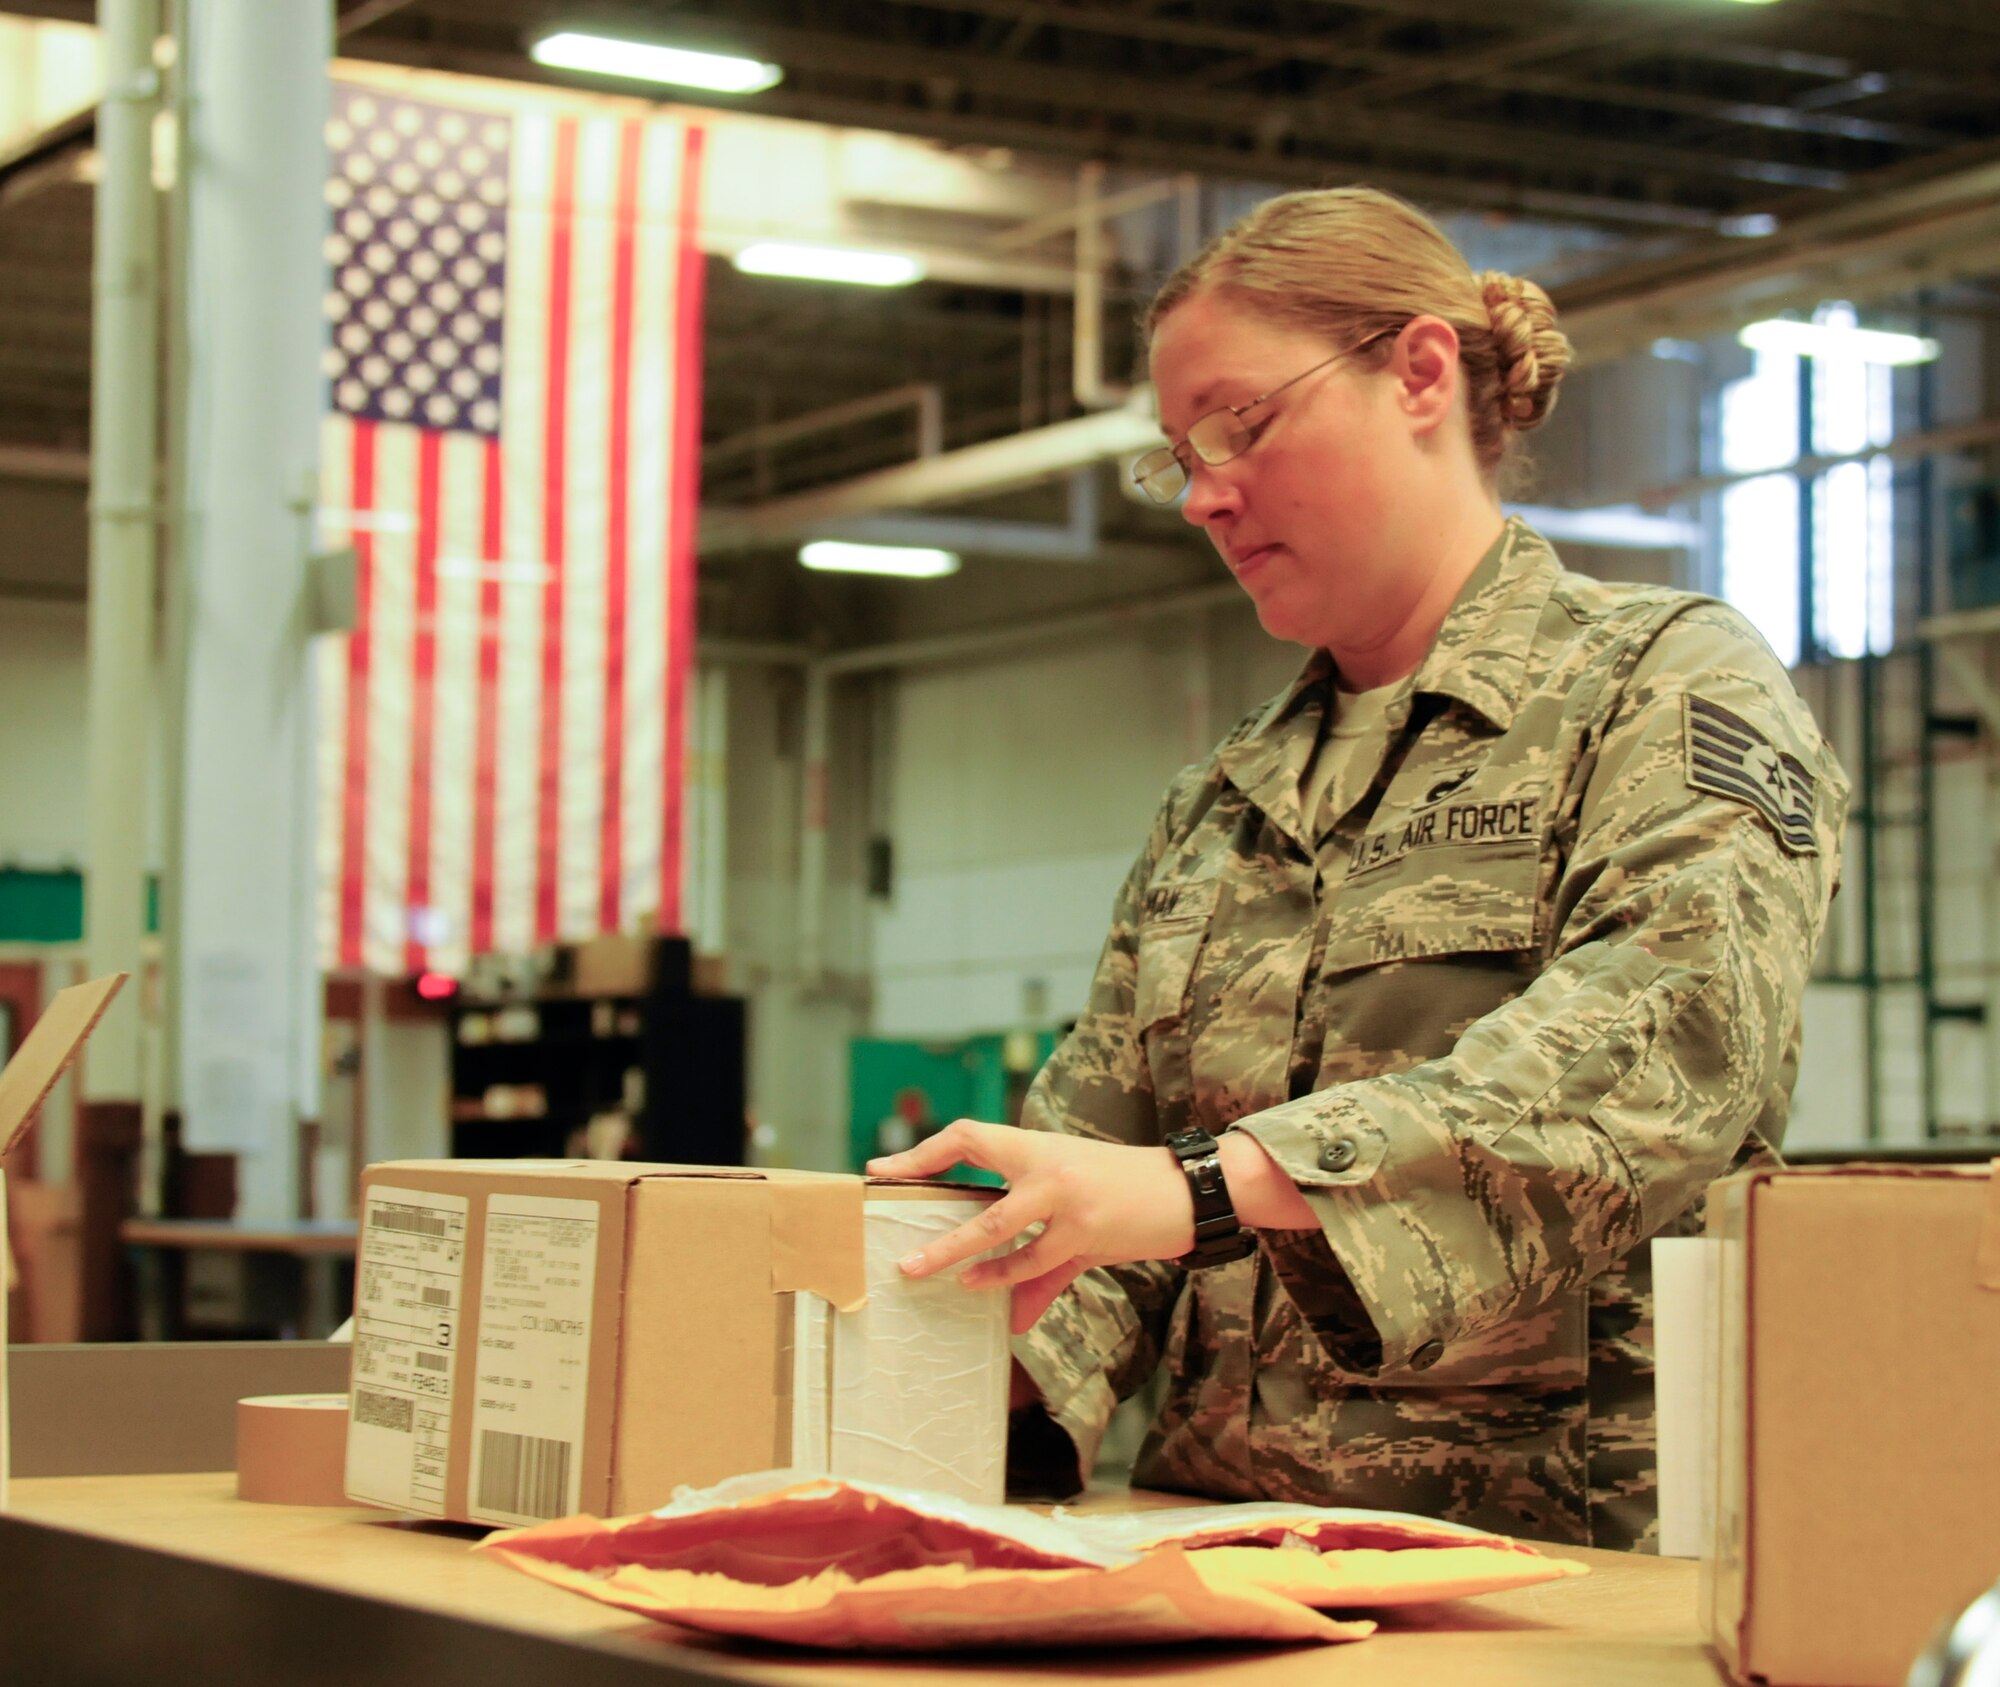 Tech. Sgt. Melissa Nyman, 90th Logistics Readiness Squadron non-commissioned-officer in charge of inbound cargo, labels a recently received item in the 90th LRS Warehouse on F.E. Warren Air Force Base, Wyo., Sept. 1, 2015. 90th LRS Inbound Cargo receives virtually every bit of material shipped to the base. (U.S. Air Force photo by Senior Airman Jason Wiese)